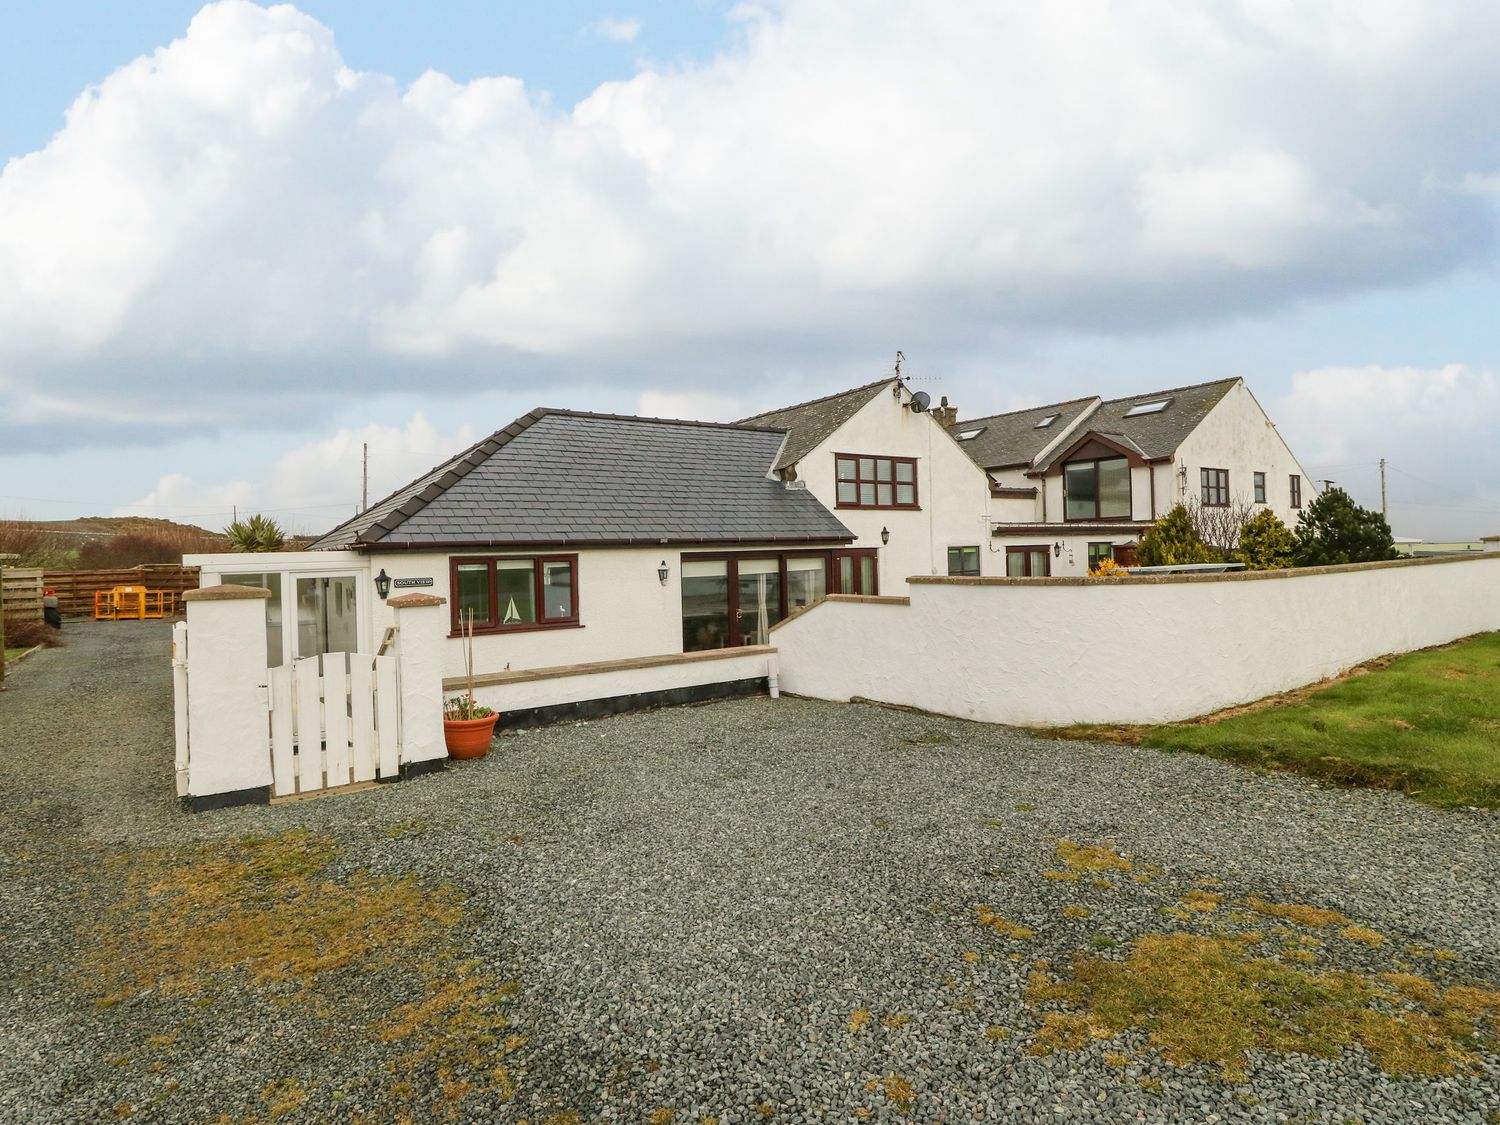 South View Cottage - Anglesey - 1091737 - photo 1